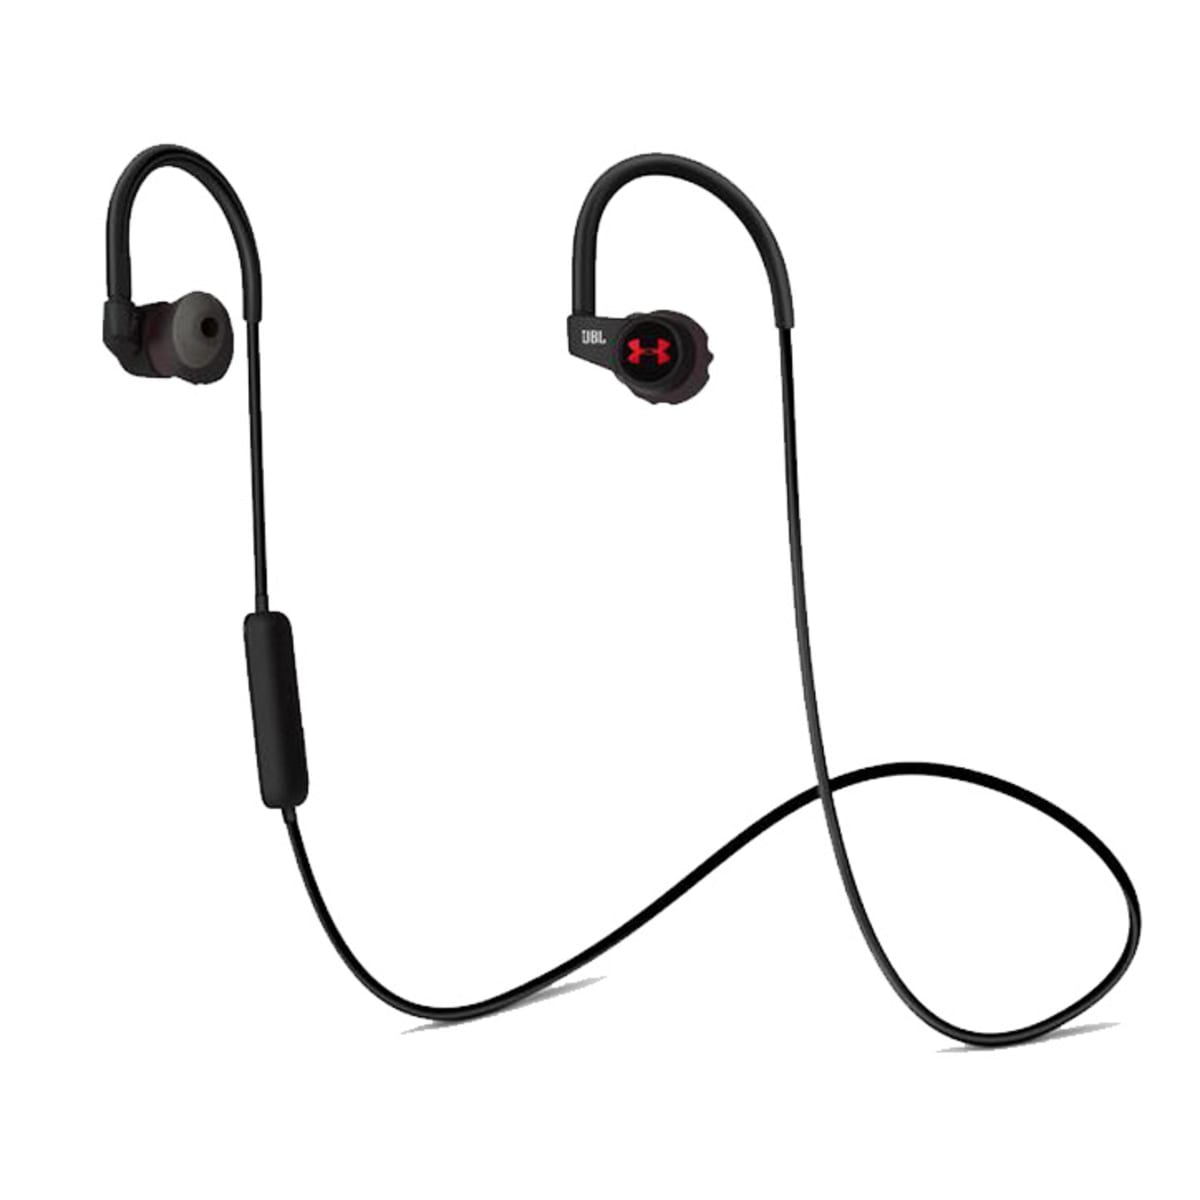 León persuadir Volcán Under Armour wireless heart rate JBL headphones review - Sports Illustrated